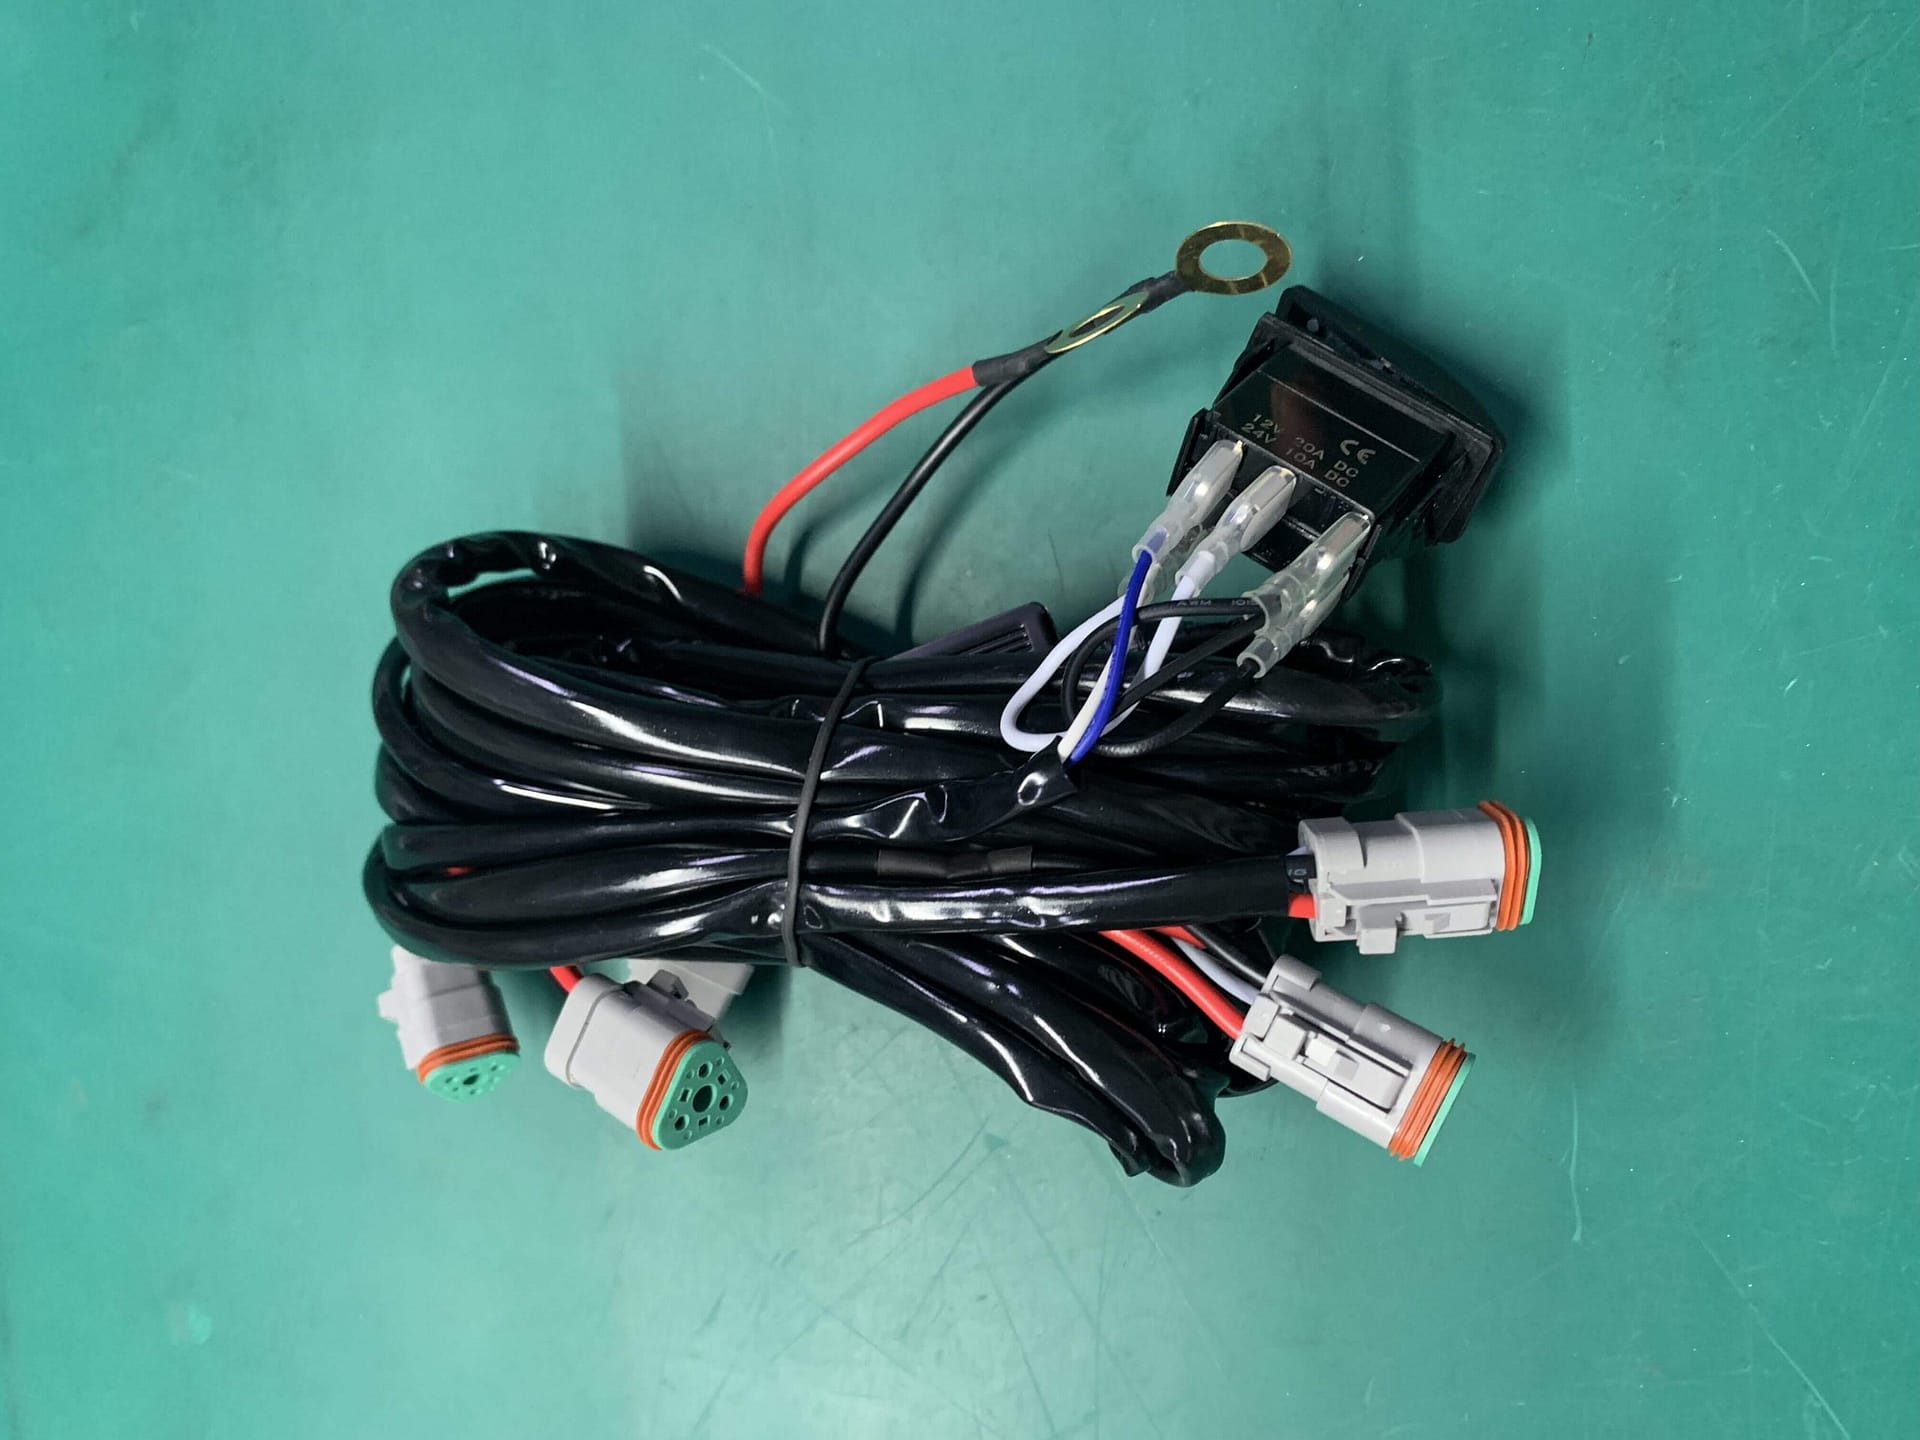 Relay wiring harness with 1 DT connector